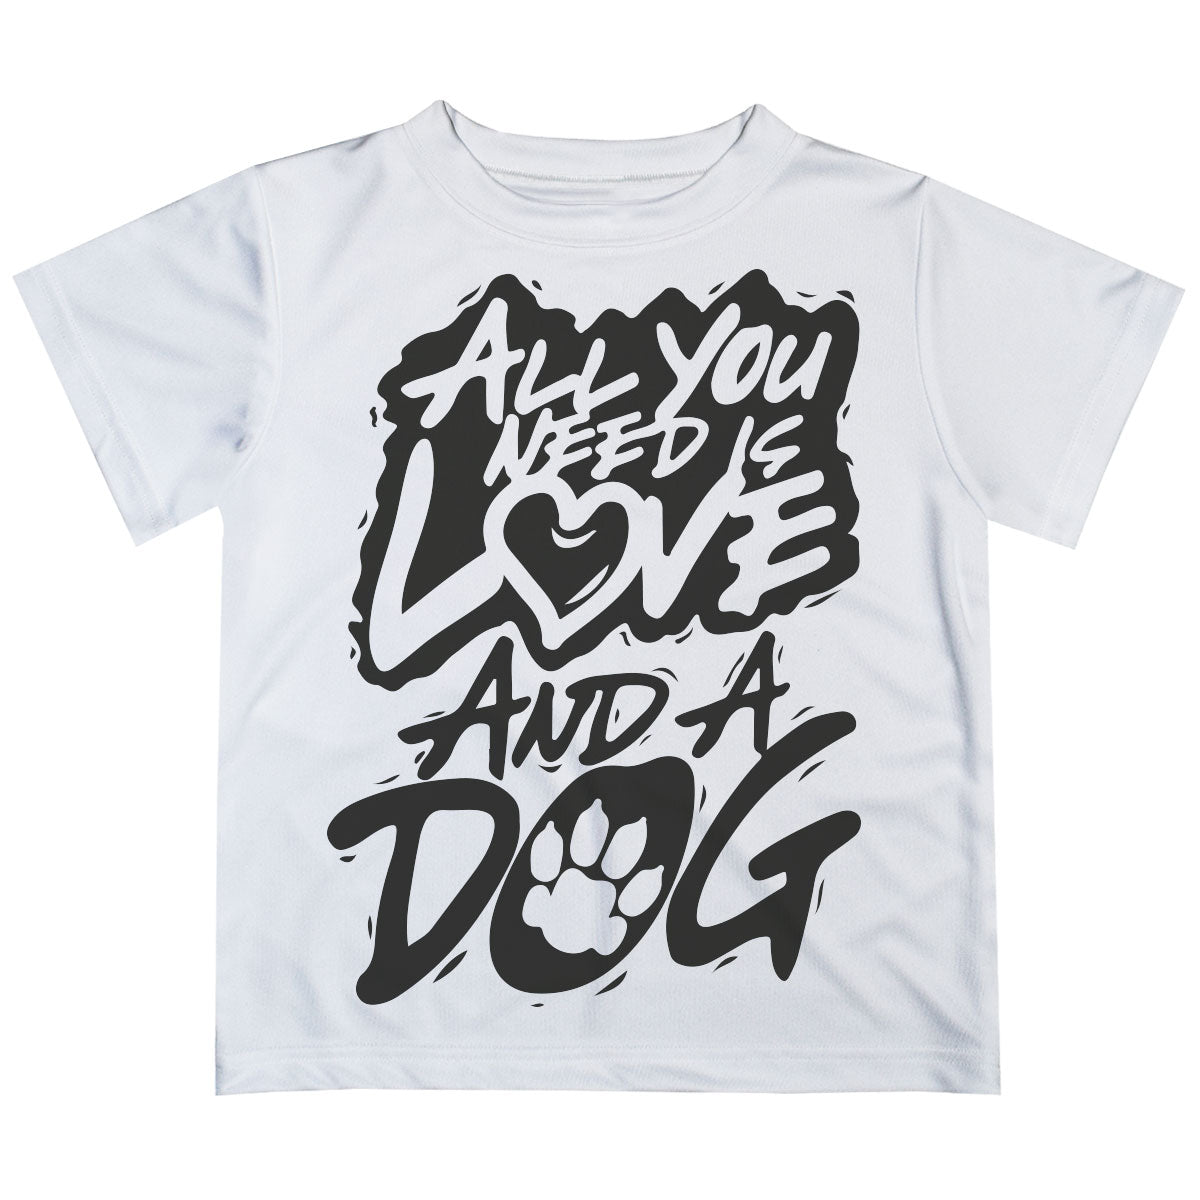 All You Need Is Love and a Dog White Short Sleeve Tee Shirt - Wimziy&Co.